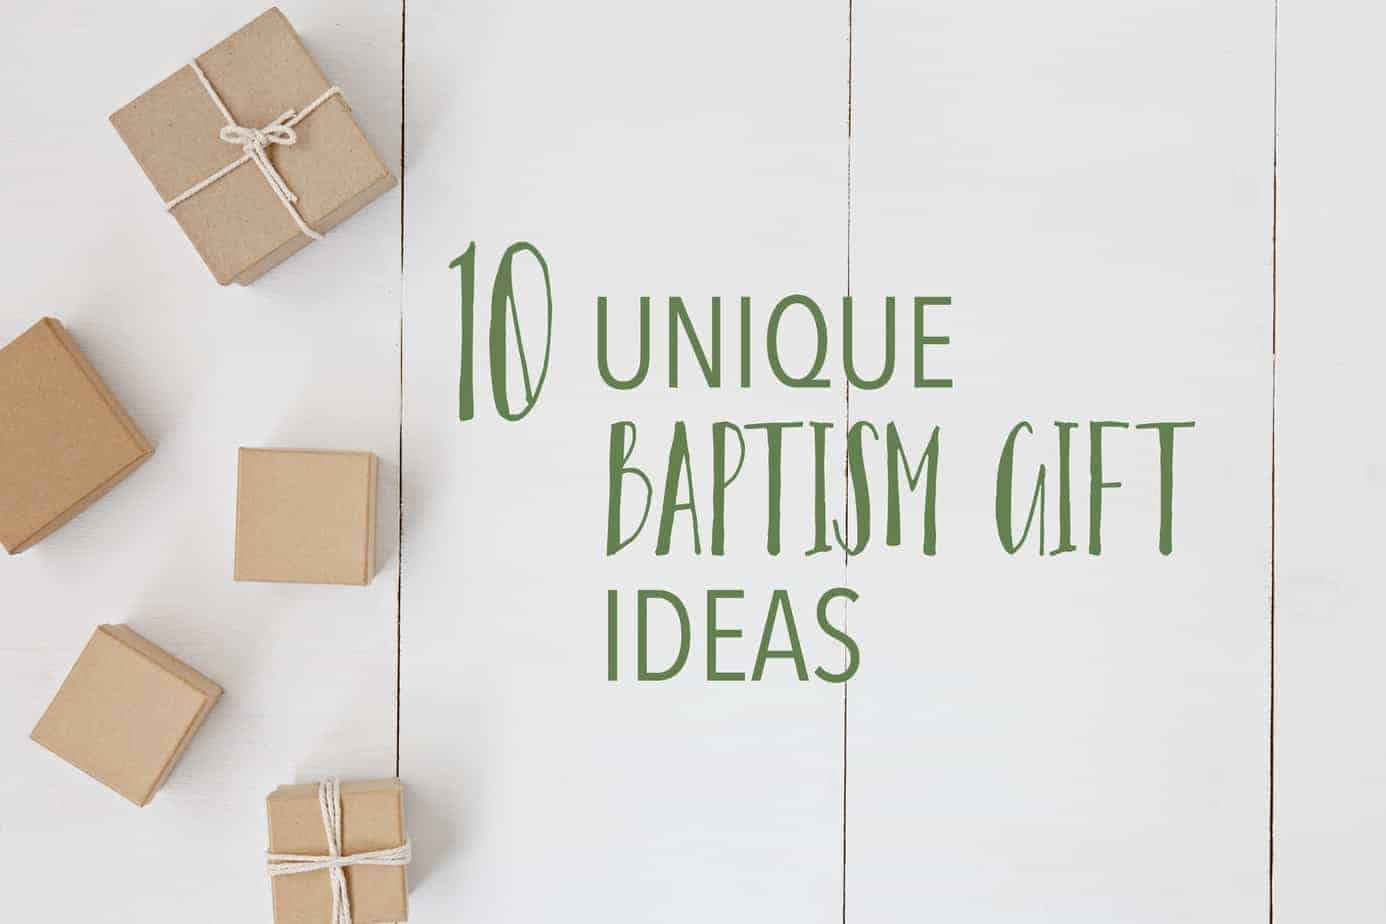 Boys Christening Gift Ideas
 10 Unique Baptism Gifts that are Useful & Special